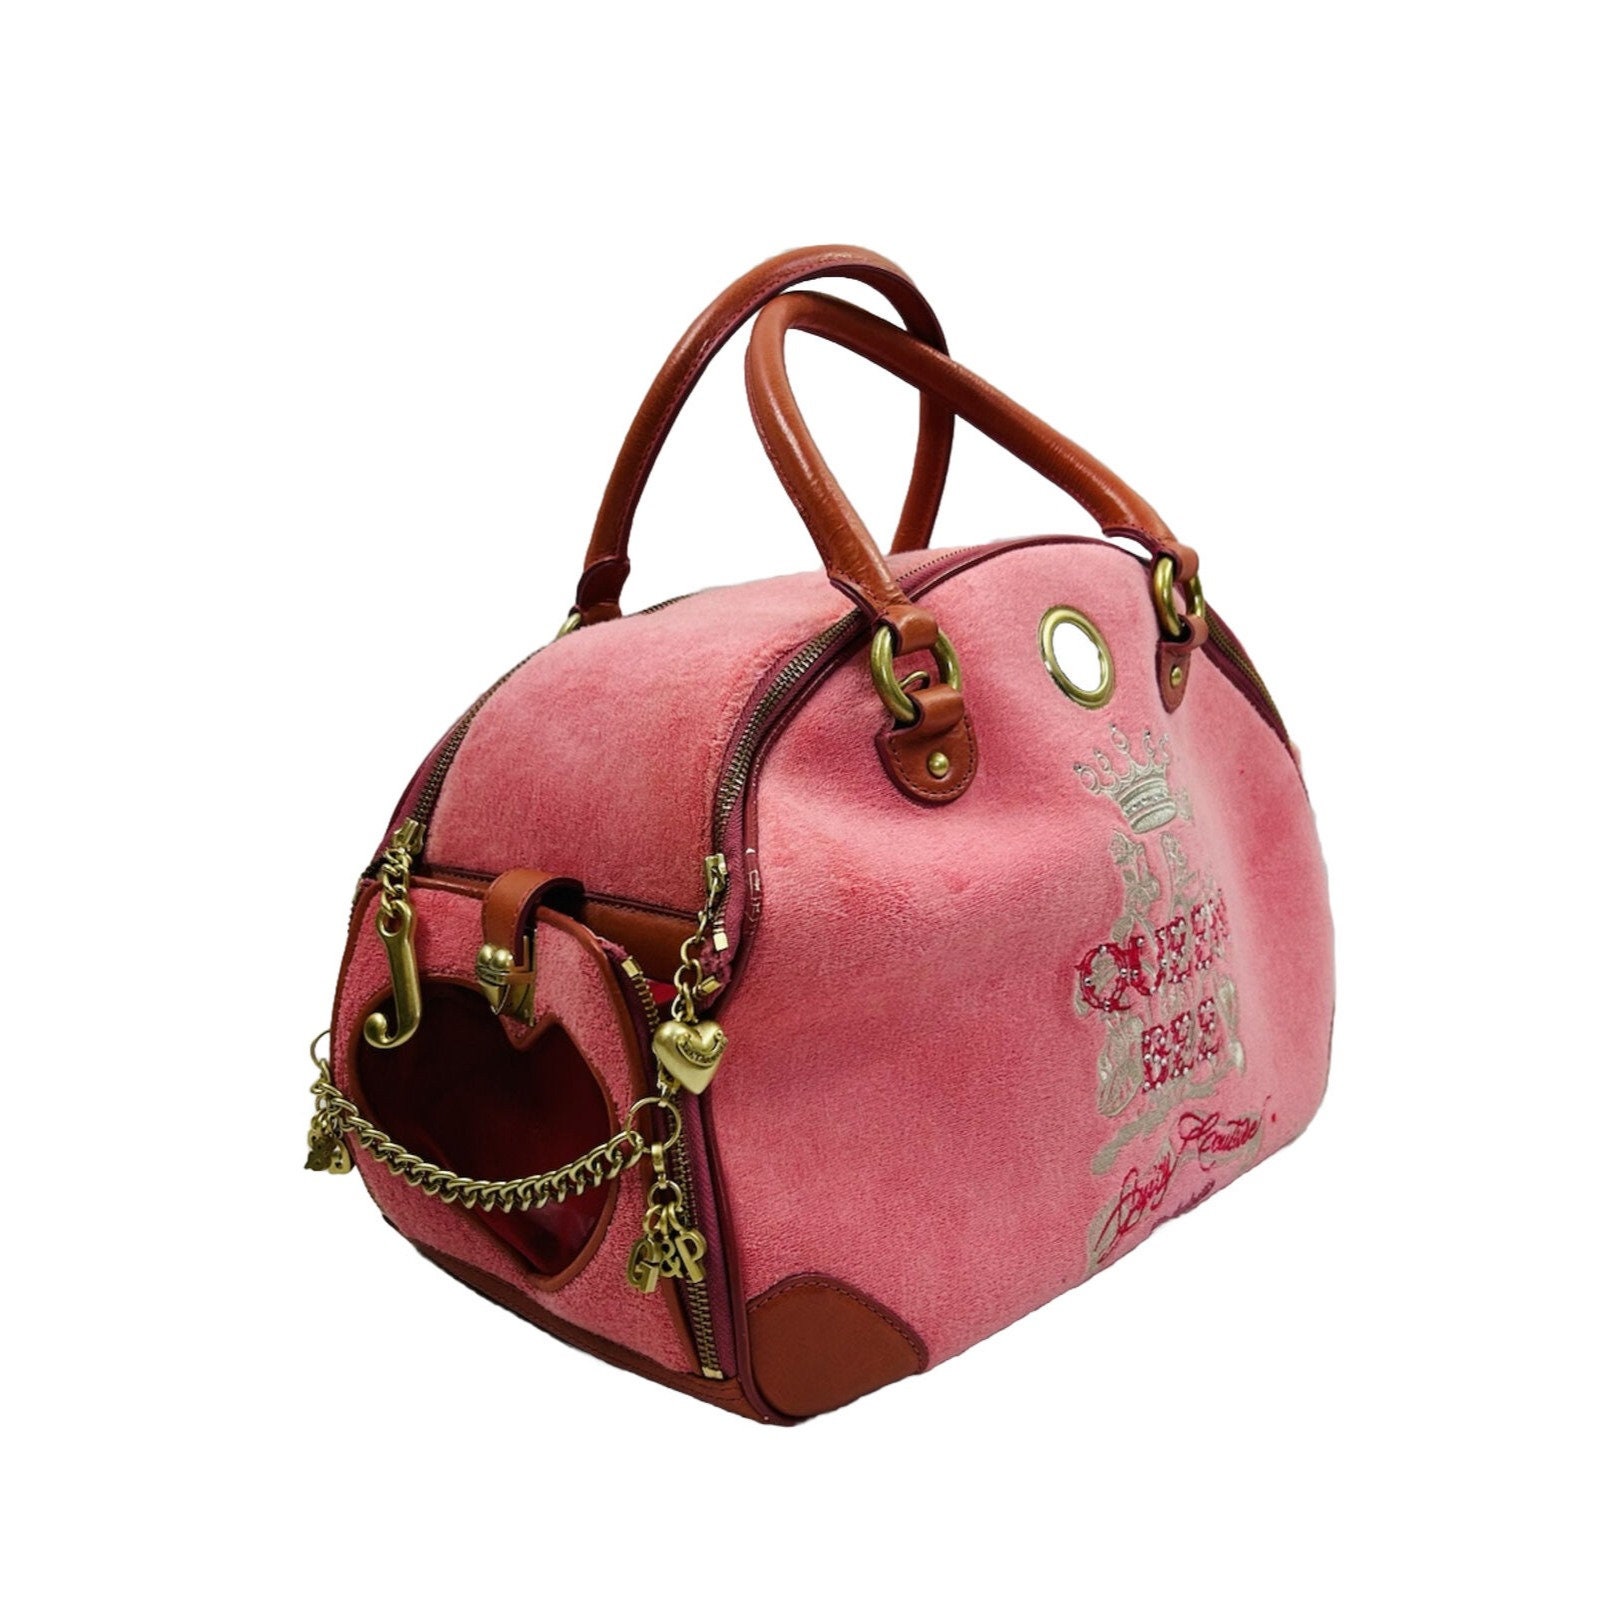 Buy Juicy Couture Tote Online In India -  India